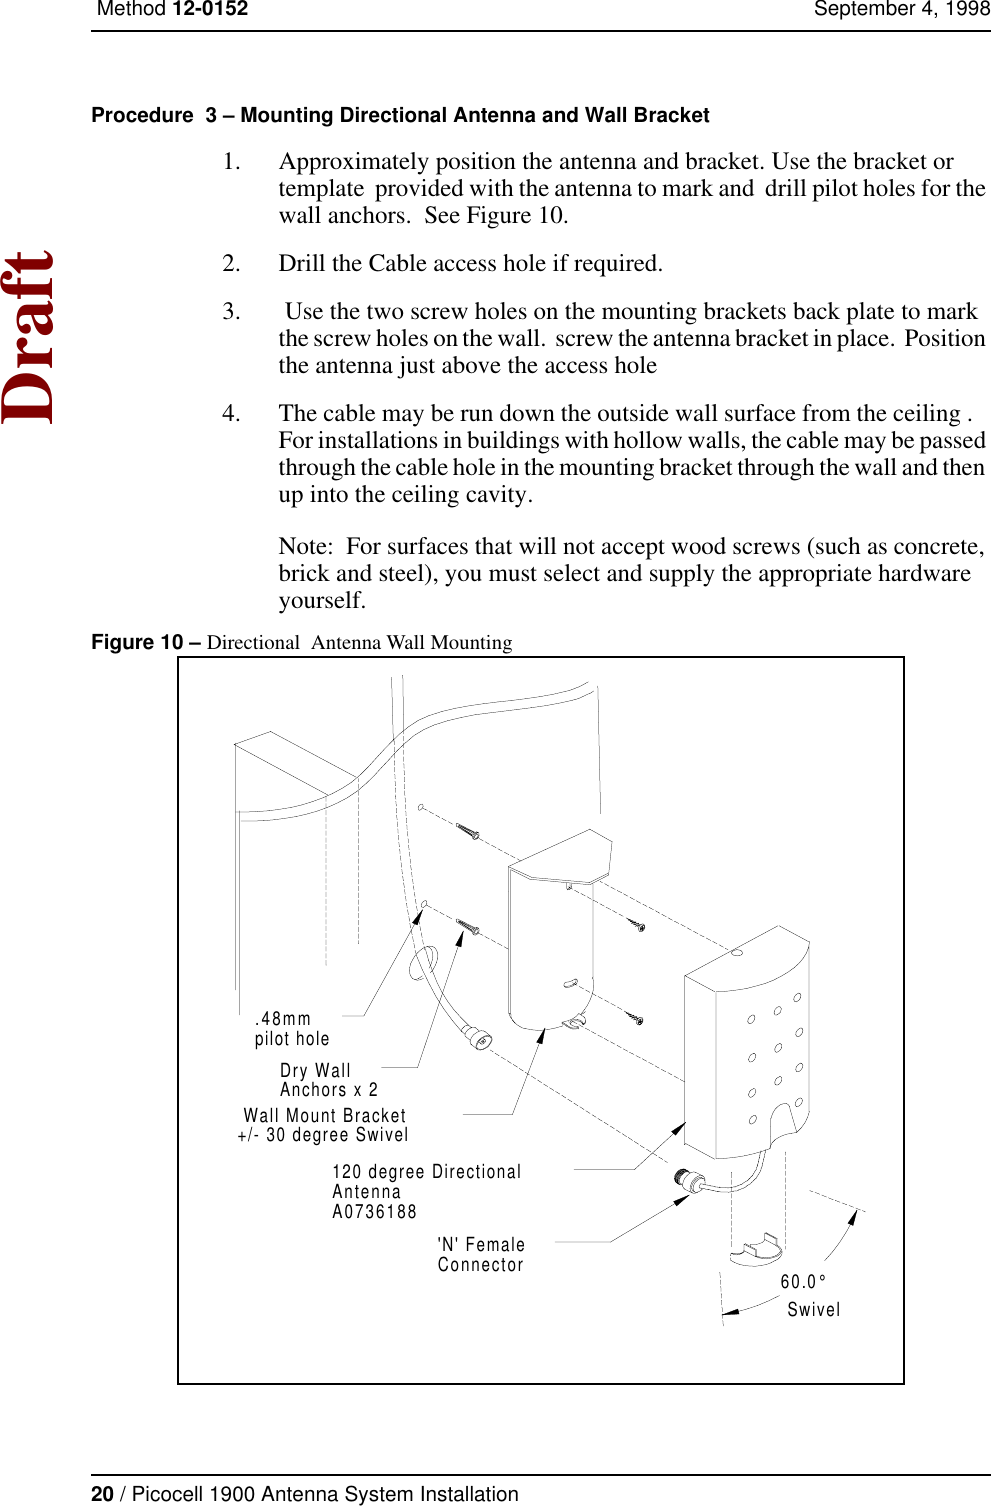 20 / Picocell 1900 Antenna System Installation Method 12-0152 September 4, 1998DraftProcedure  3 – Mounting Directional Antenna and Wall Bracket 1. Approximately position the antenna and bracket. Use the bracket or template  provided with the antenna to mark and  drill pilot holes for the wall anchors.  See Figure 10.2. Drill the Cable access hole if required.3.  Use the two screw holes on the mounting brackets back plate to mark the screw holes on the wall.  screw the antenna bracket in place.  Position the antenna just above the access hole 4. The cable may be run down the outside wall surface from the ceiling .   For installations in buildings with hollow walls, the cable may be passed through the cable hole in the mounting bracket through the wall and then up into the ceiling cavity.Note:  For surfaces that will not accept wood screws (such as concrete, brick and steel), you must select and supply the appropriate hardware yourself.Figure 10 – Directional  Antenna Wall Mounting Wall Mount Bracket+/- 30 degree Swivel.48mmpilot hole60.0°SwivelDry WallAnchors x 2120 degree DirectionalAntennaA0736188&apos;N&apos; FemaleConnector